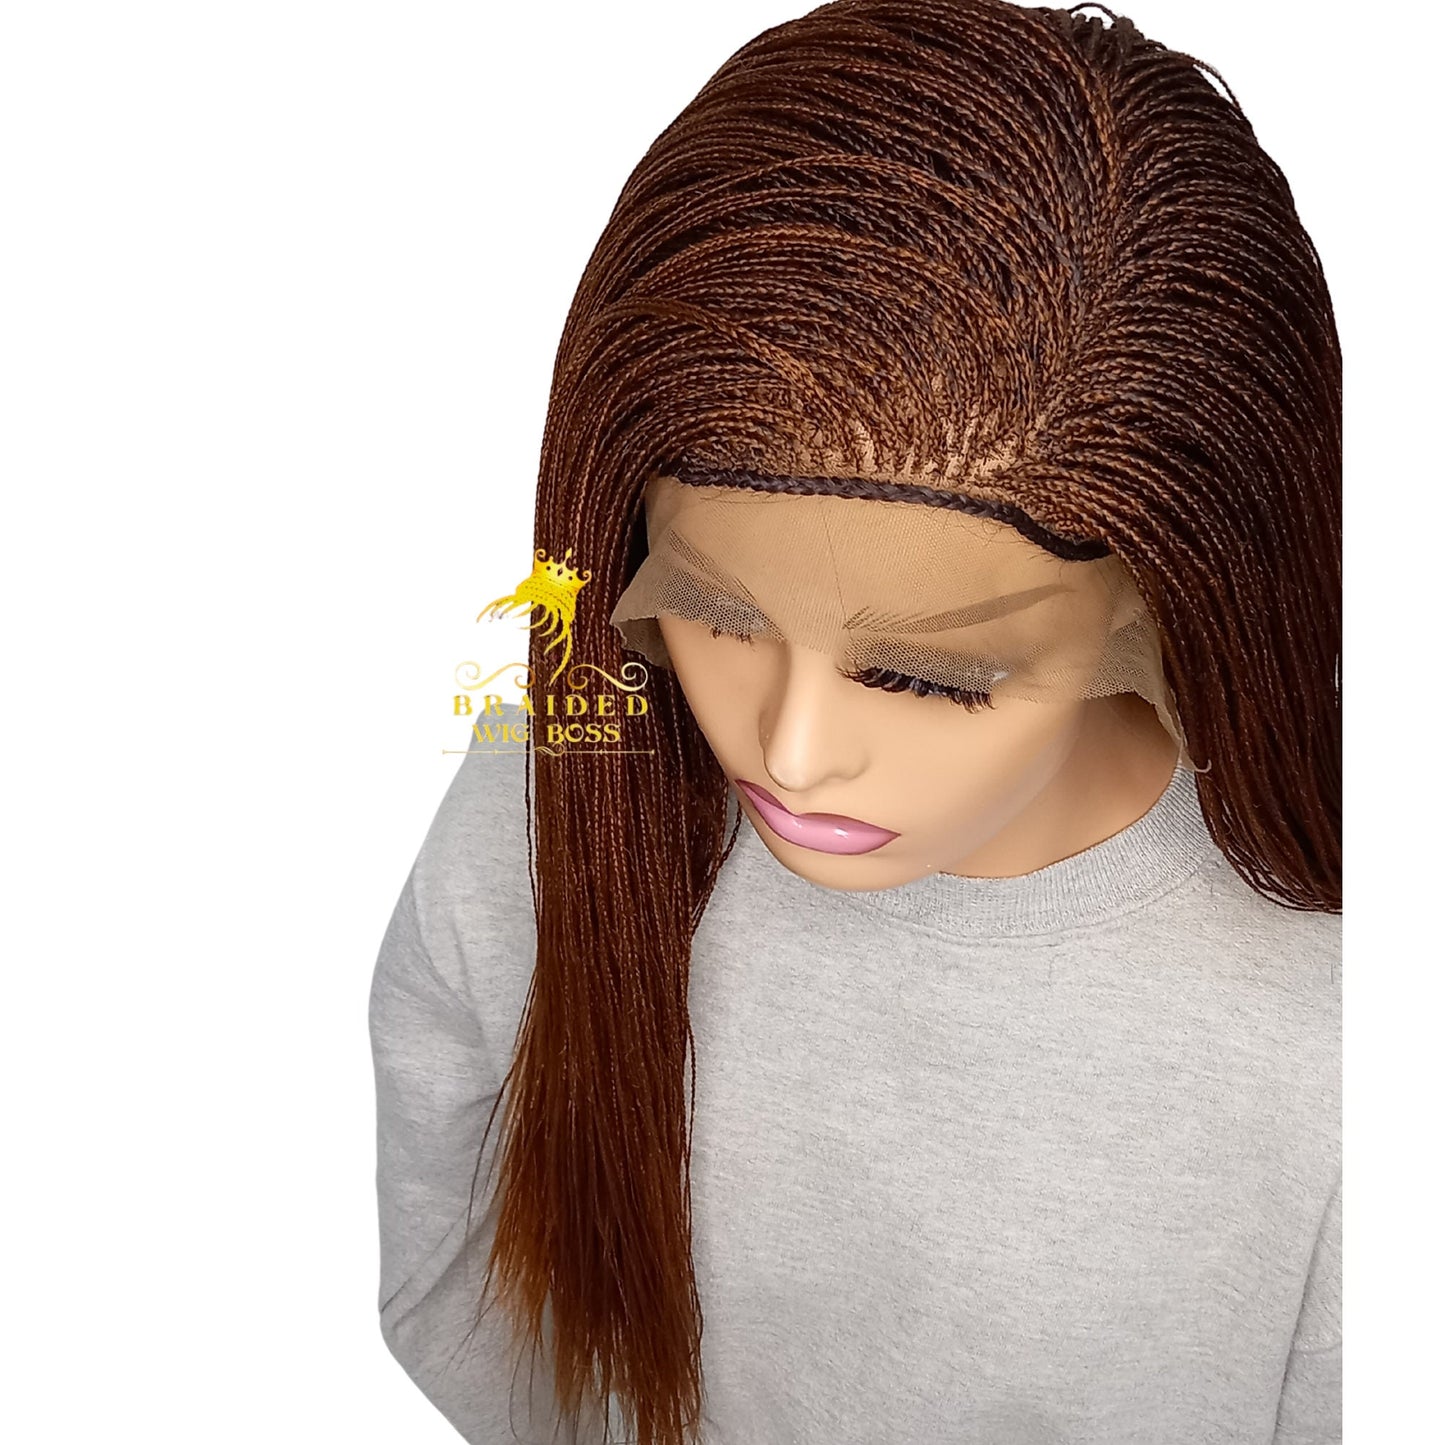 Micro Braided Wig for Black Women - 13x6 Braided Lace Wig, Auburn Color 30, 100% Handmade Box Braids Heat Resistant Synthetic with Baby Hair